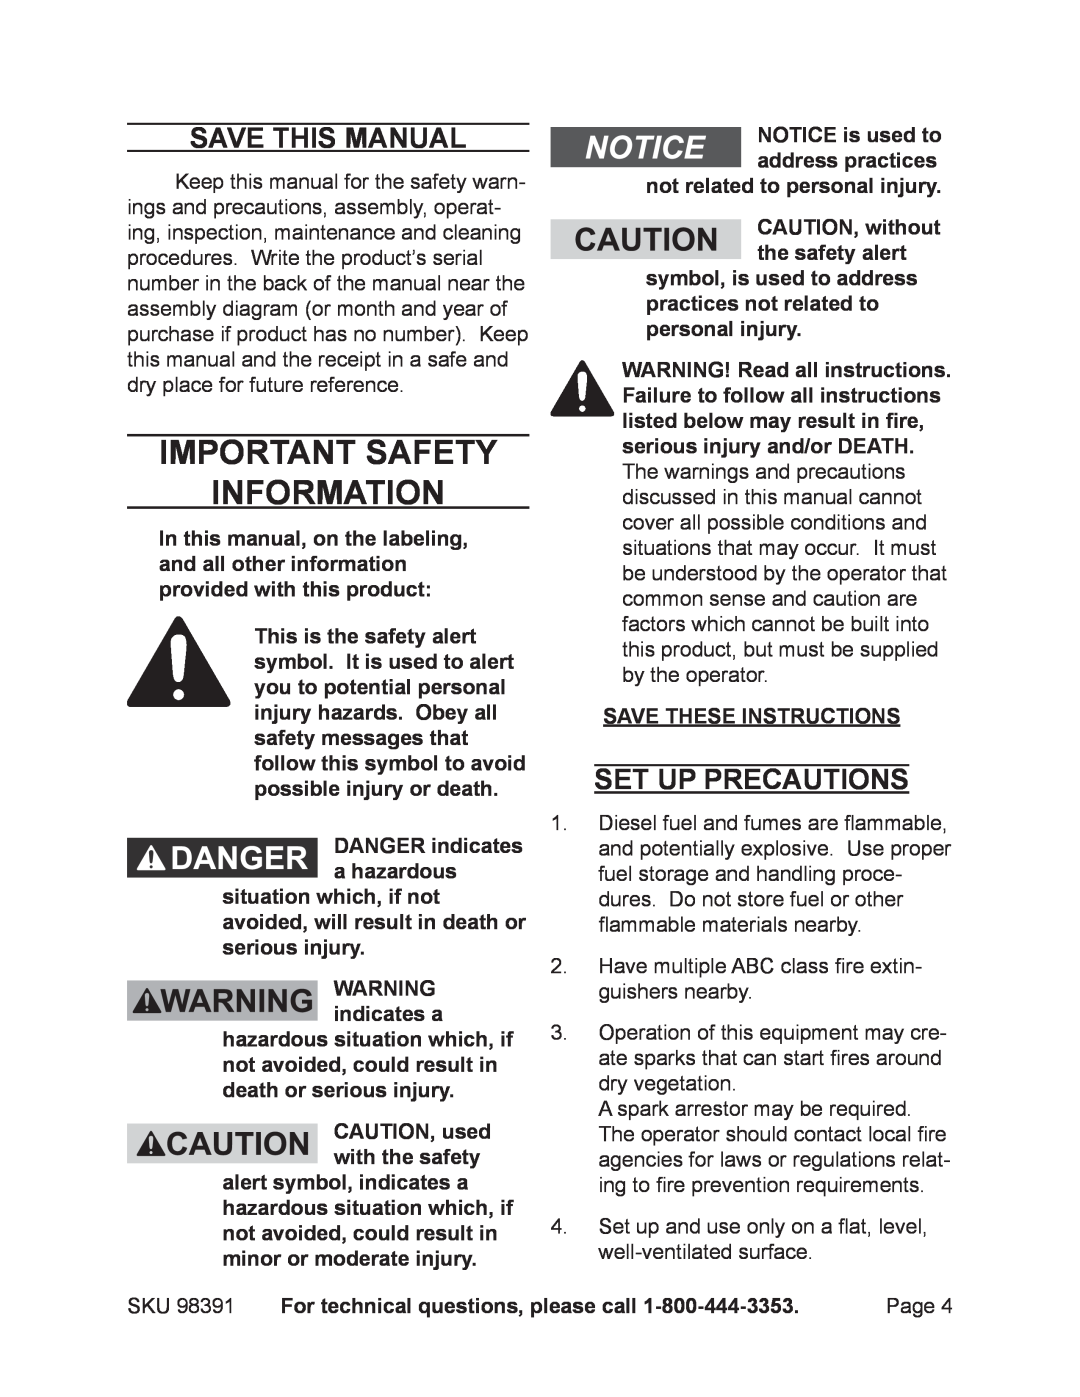 Chicago Electric 98391 Important SAFETY Information, Save This Manual, Set up precautions, DANGER indicates a hazardous 